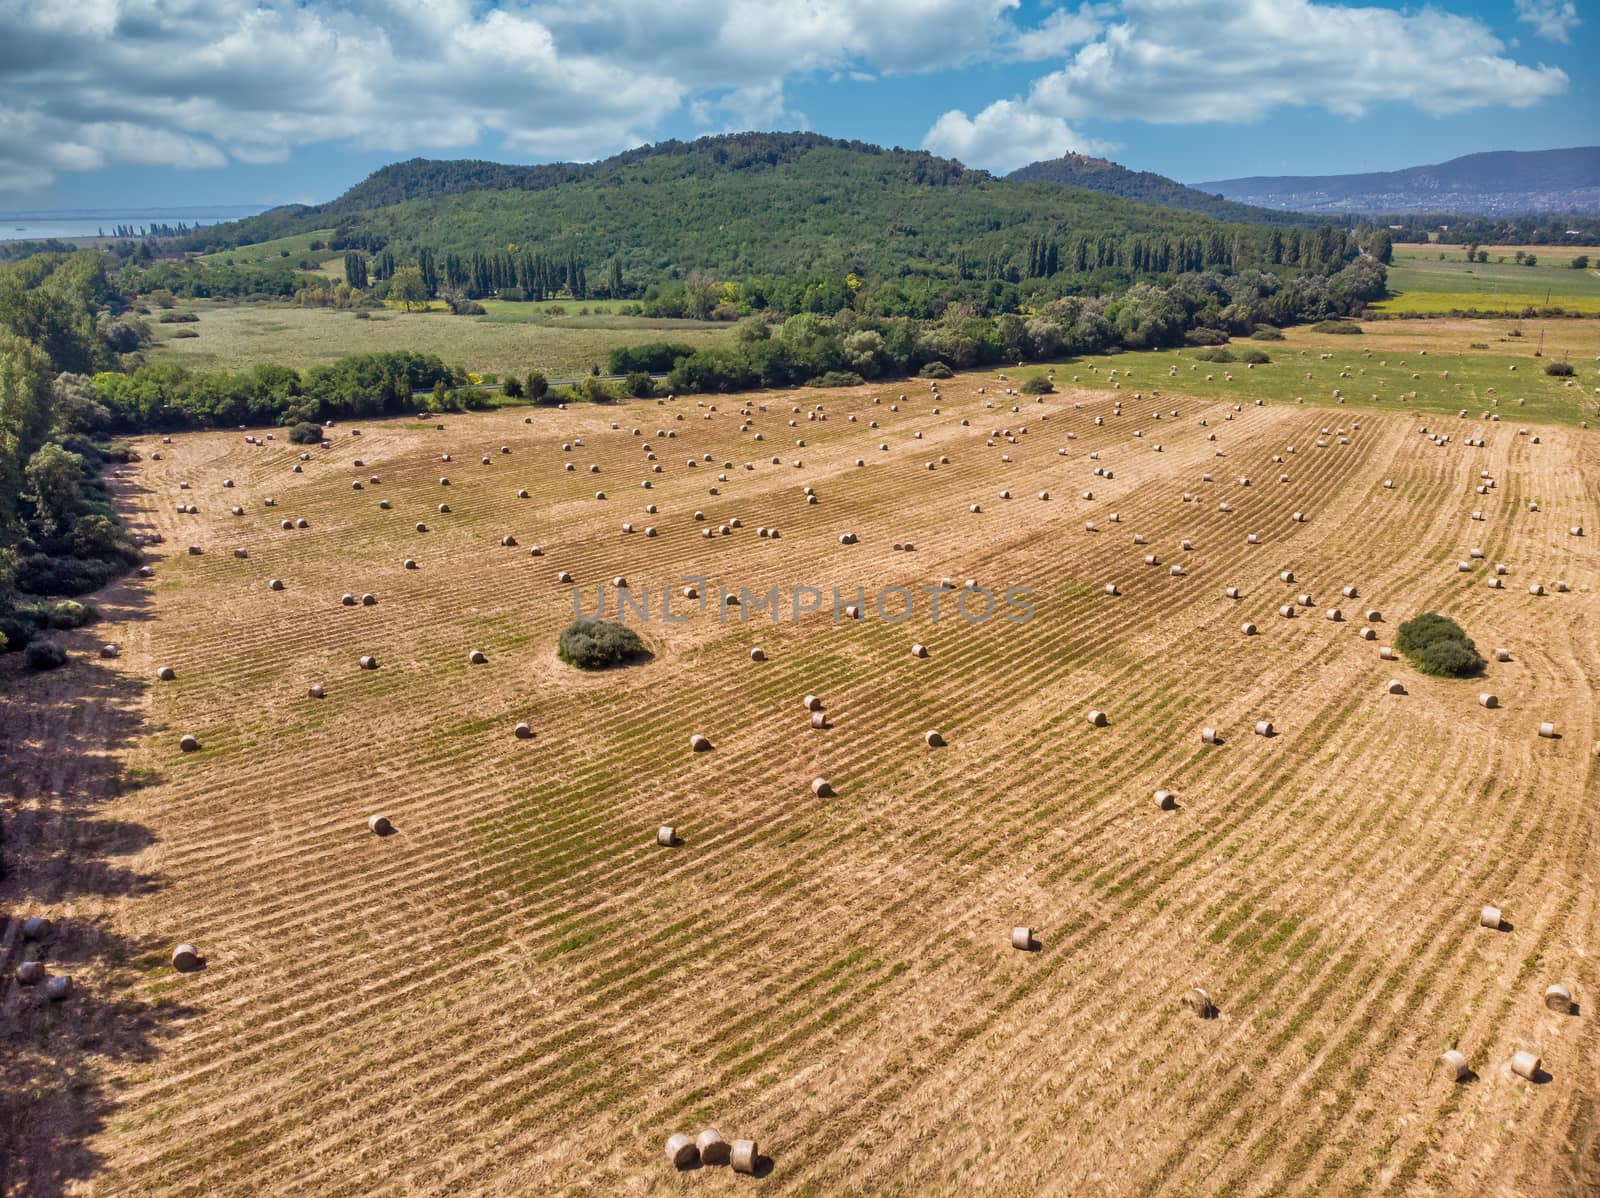 Bales of hay on the field after harvest shot by drone,Hungary near Lake Balaton